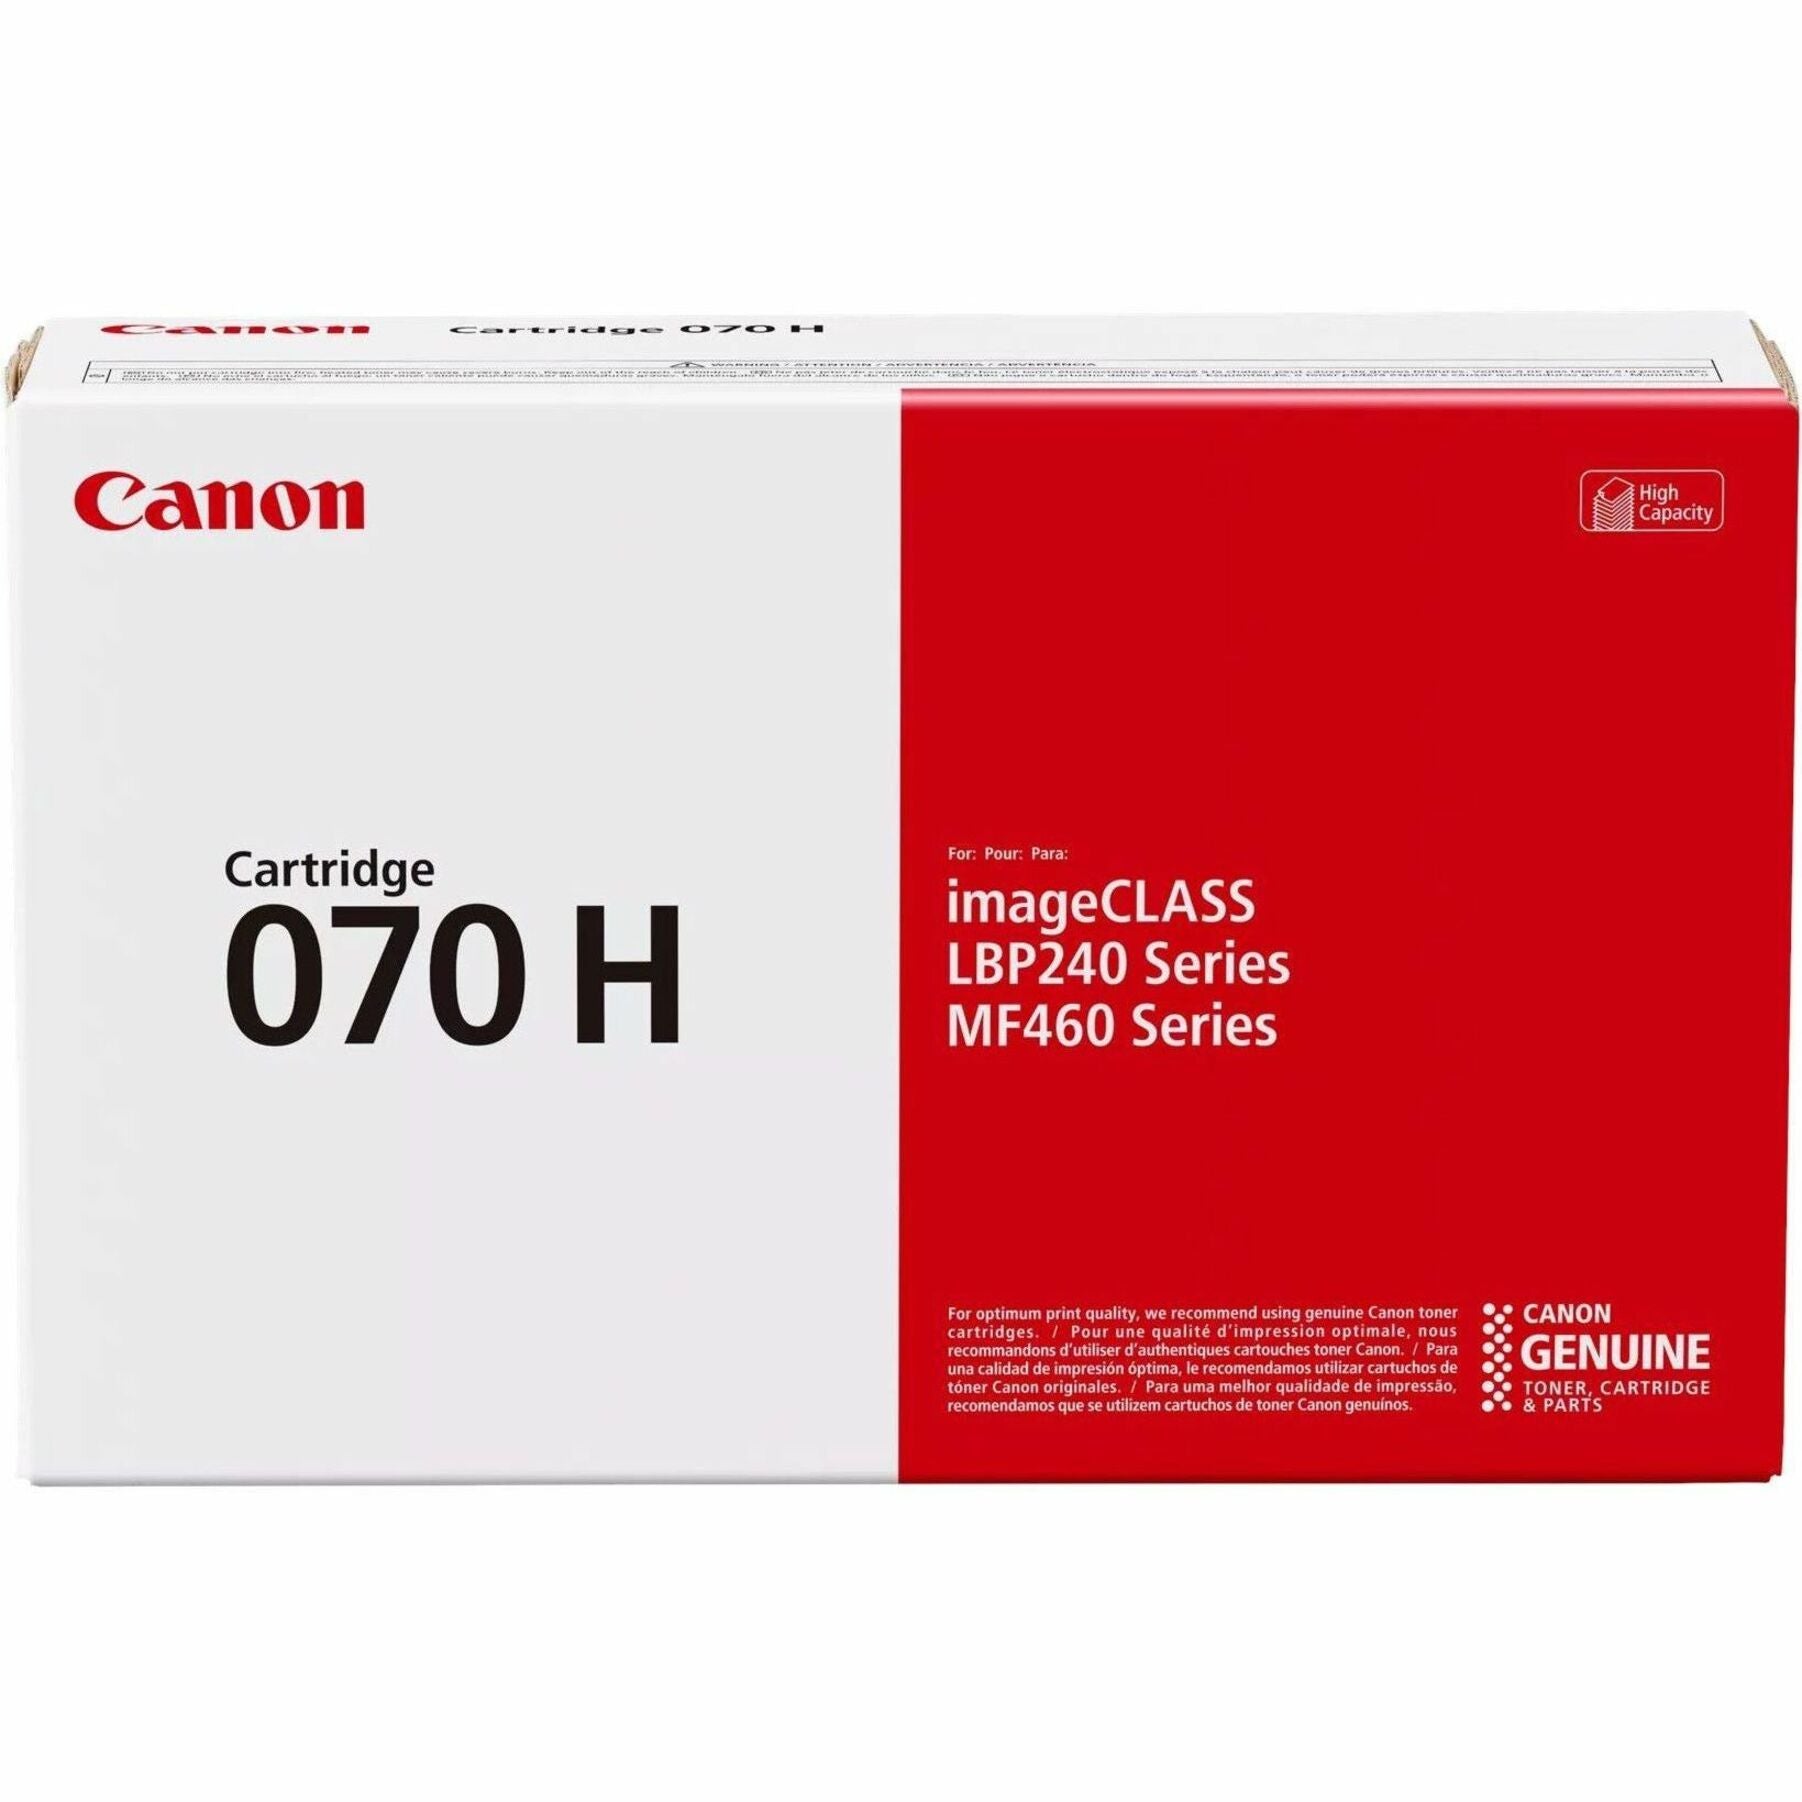 Canon 5640C001 070H Black Toner Cartridge, High Capacity - 10200 Pages